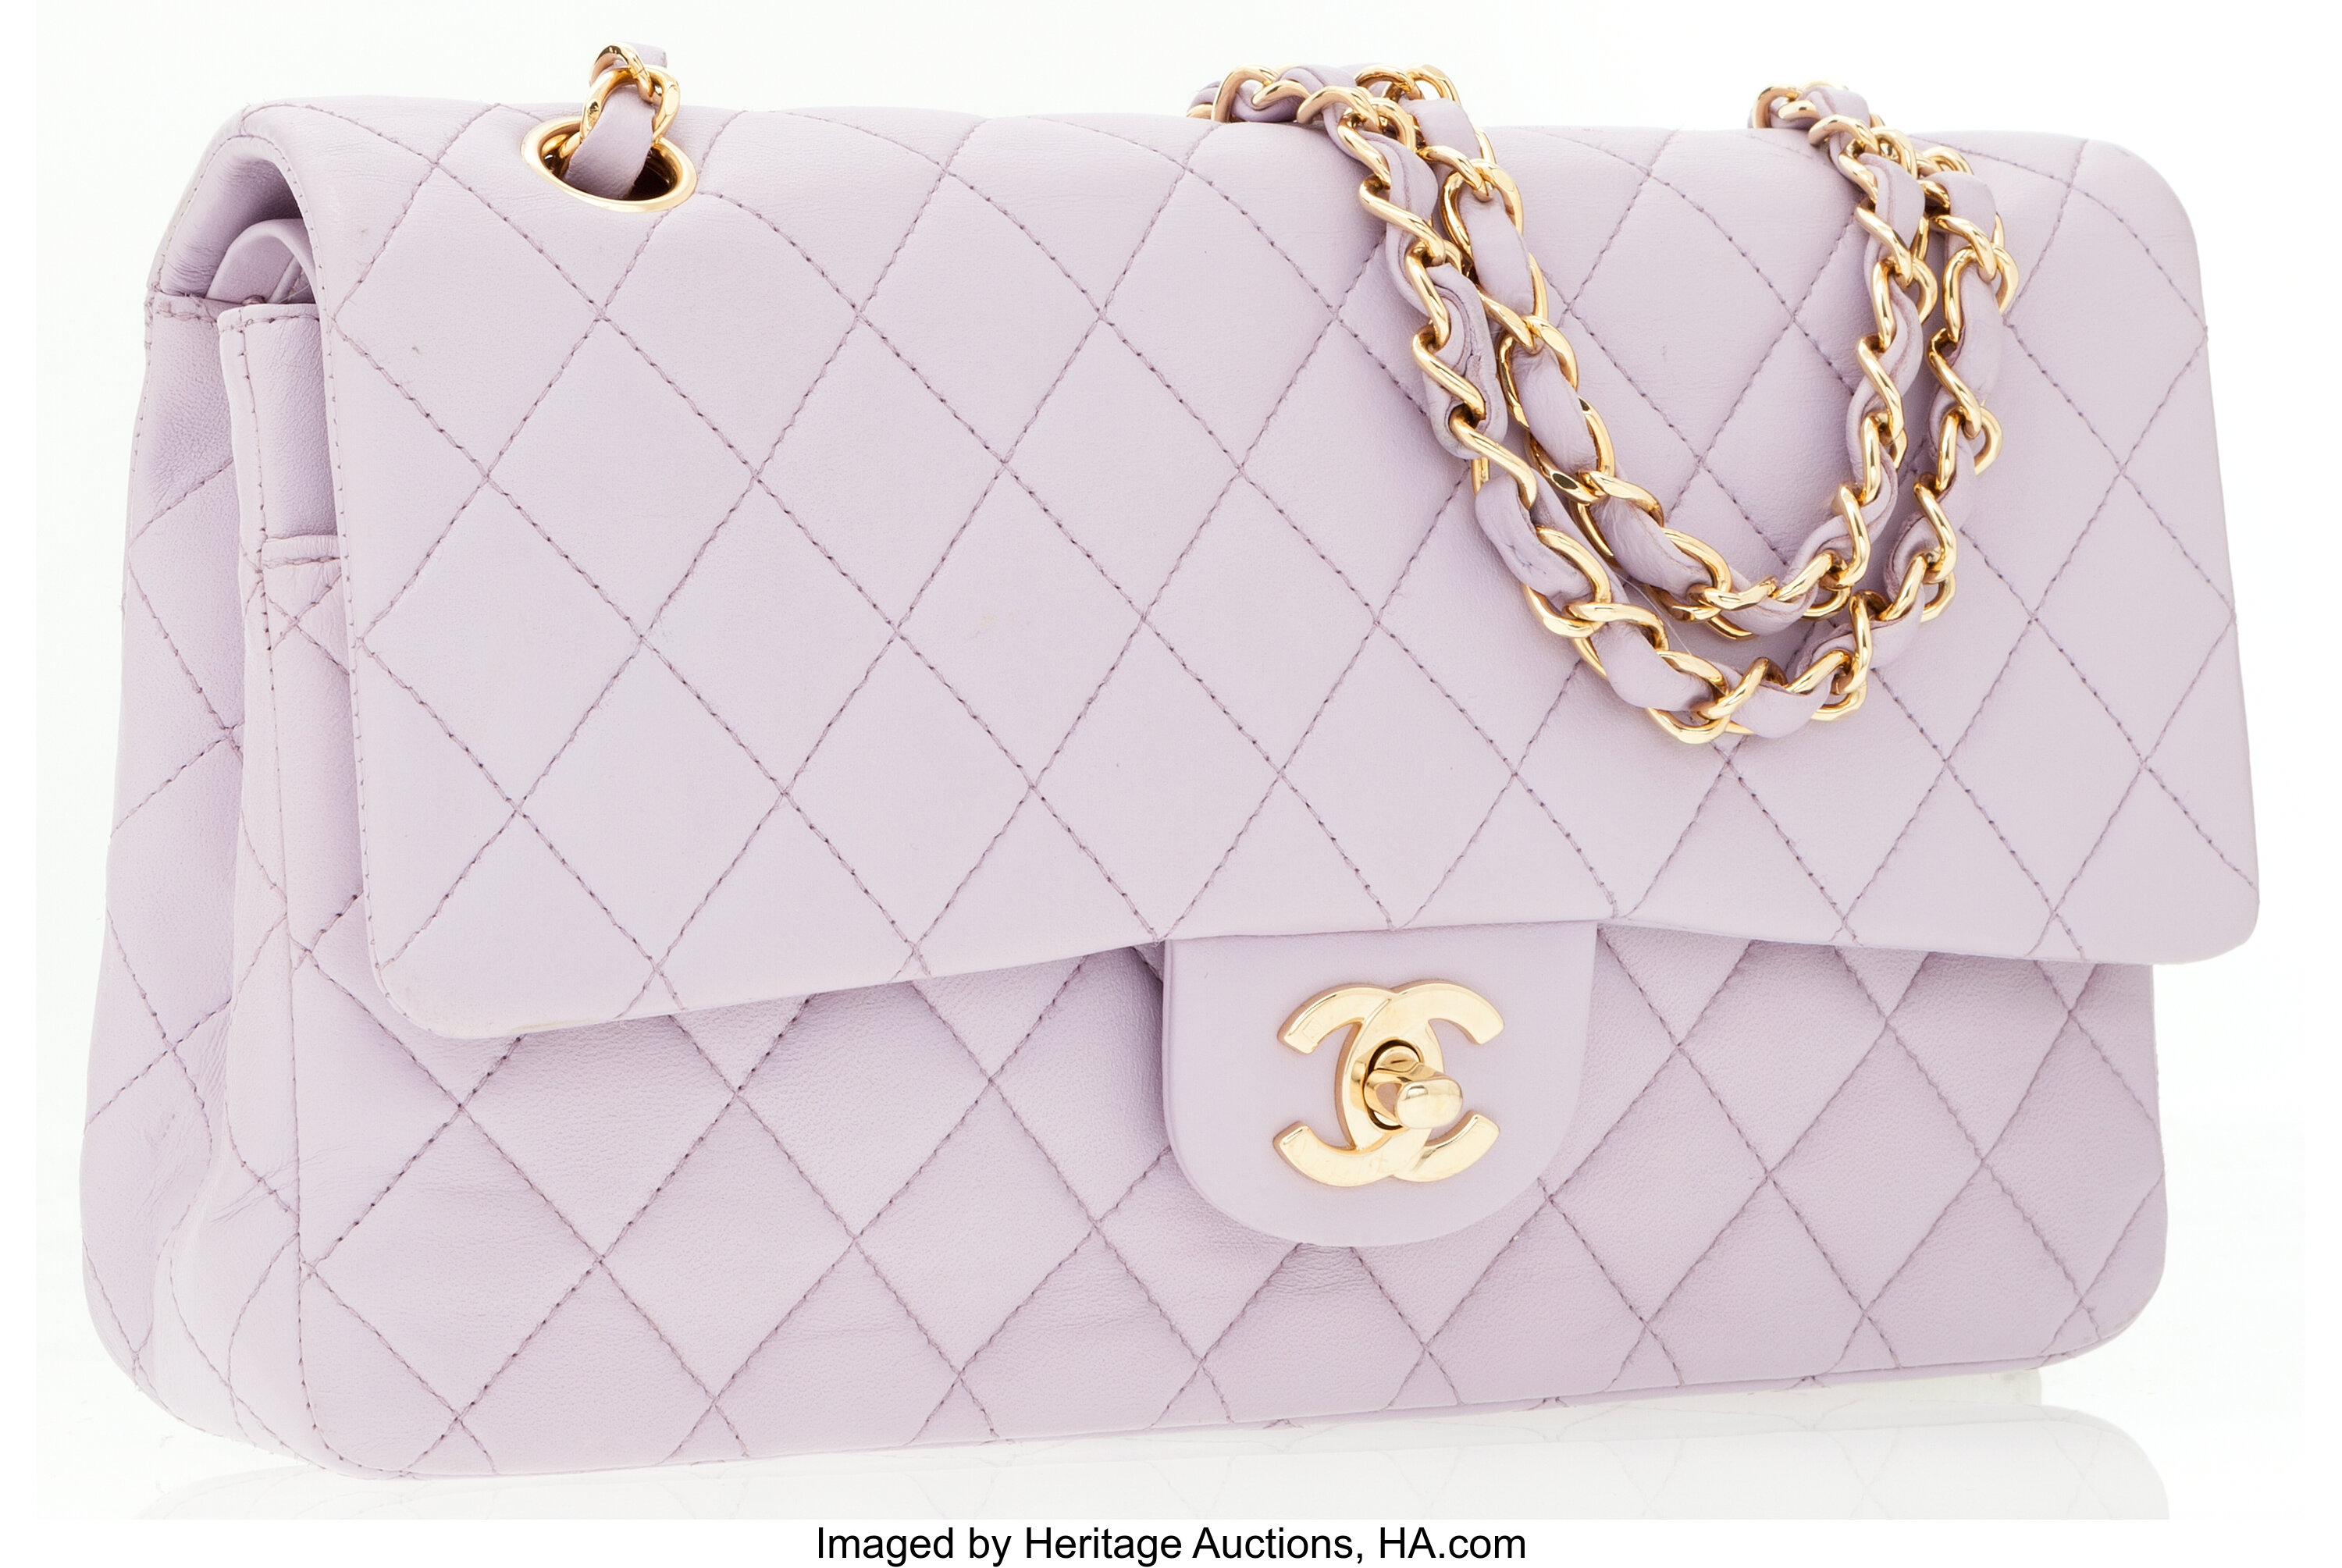 Chanel Lilac Quilted Lambskin Leather Medium Double Flap Bag with, Lot # 79023